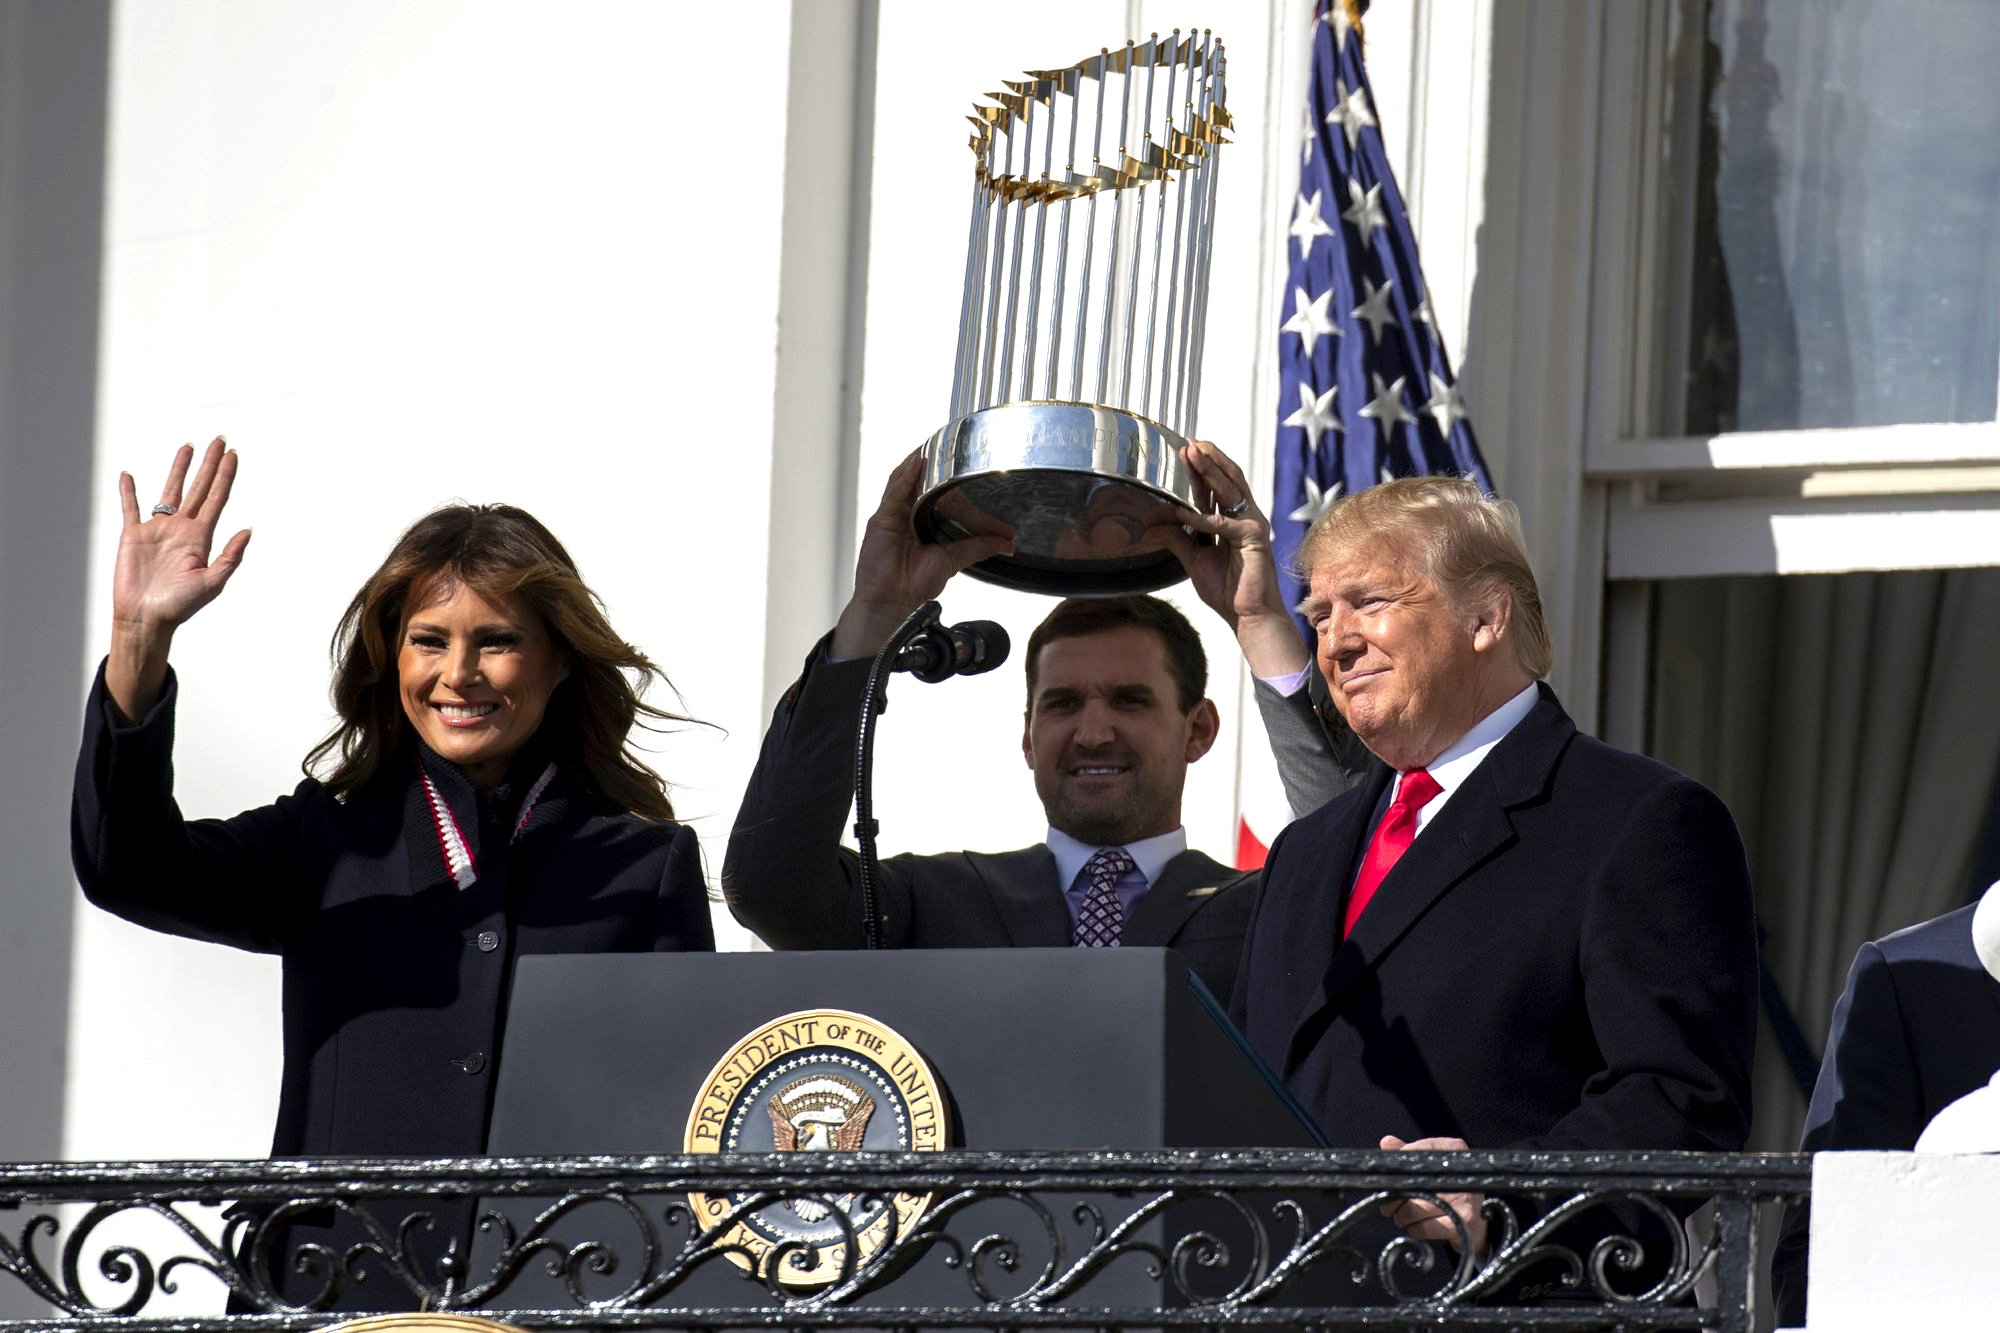 The Washington Nationals players who weren't at the White House